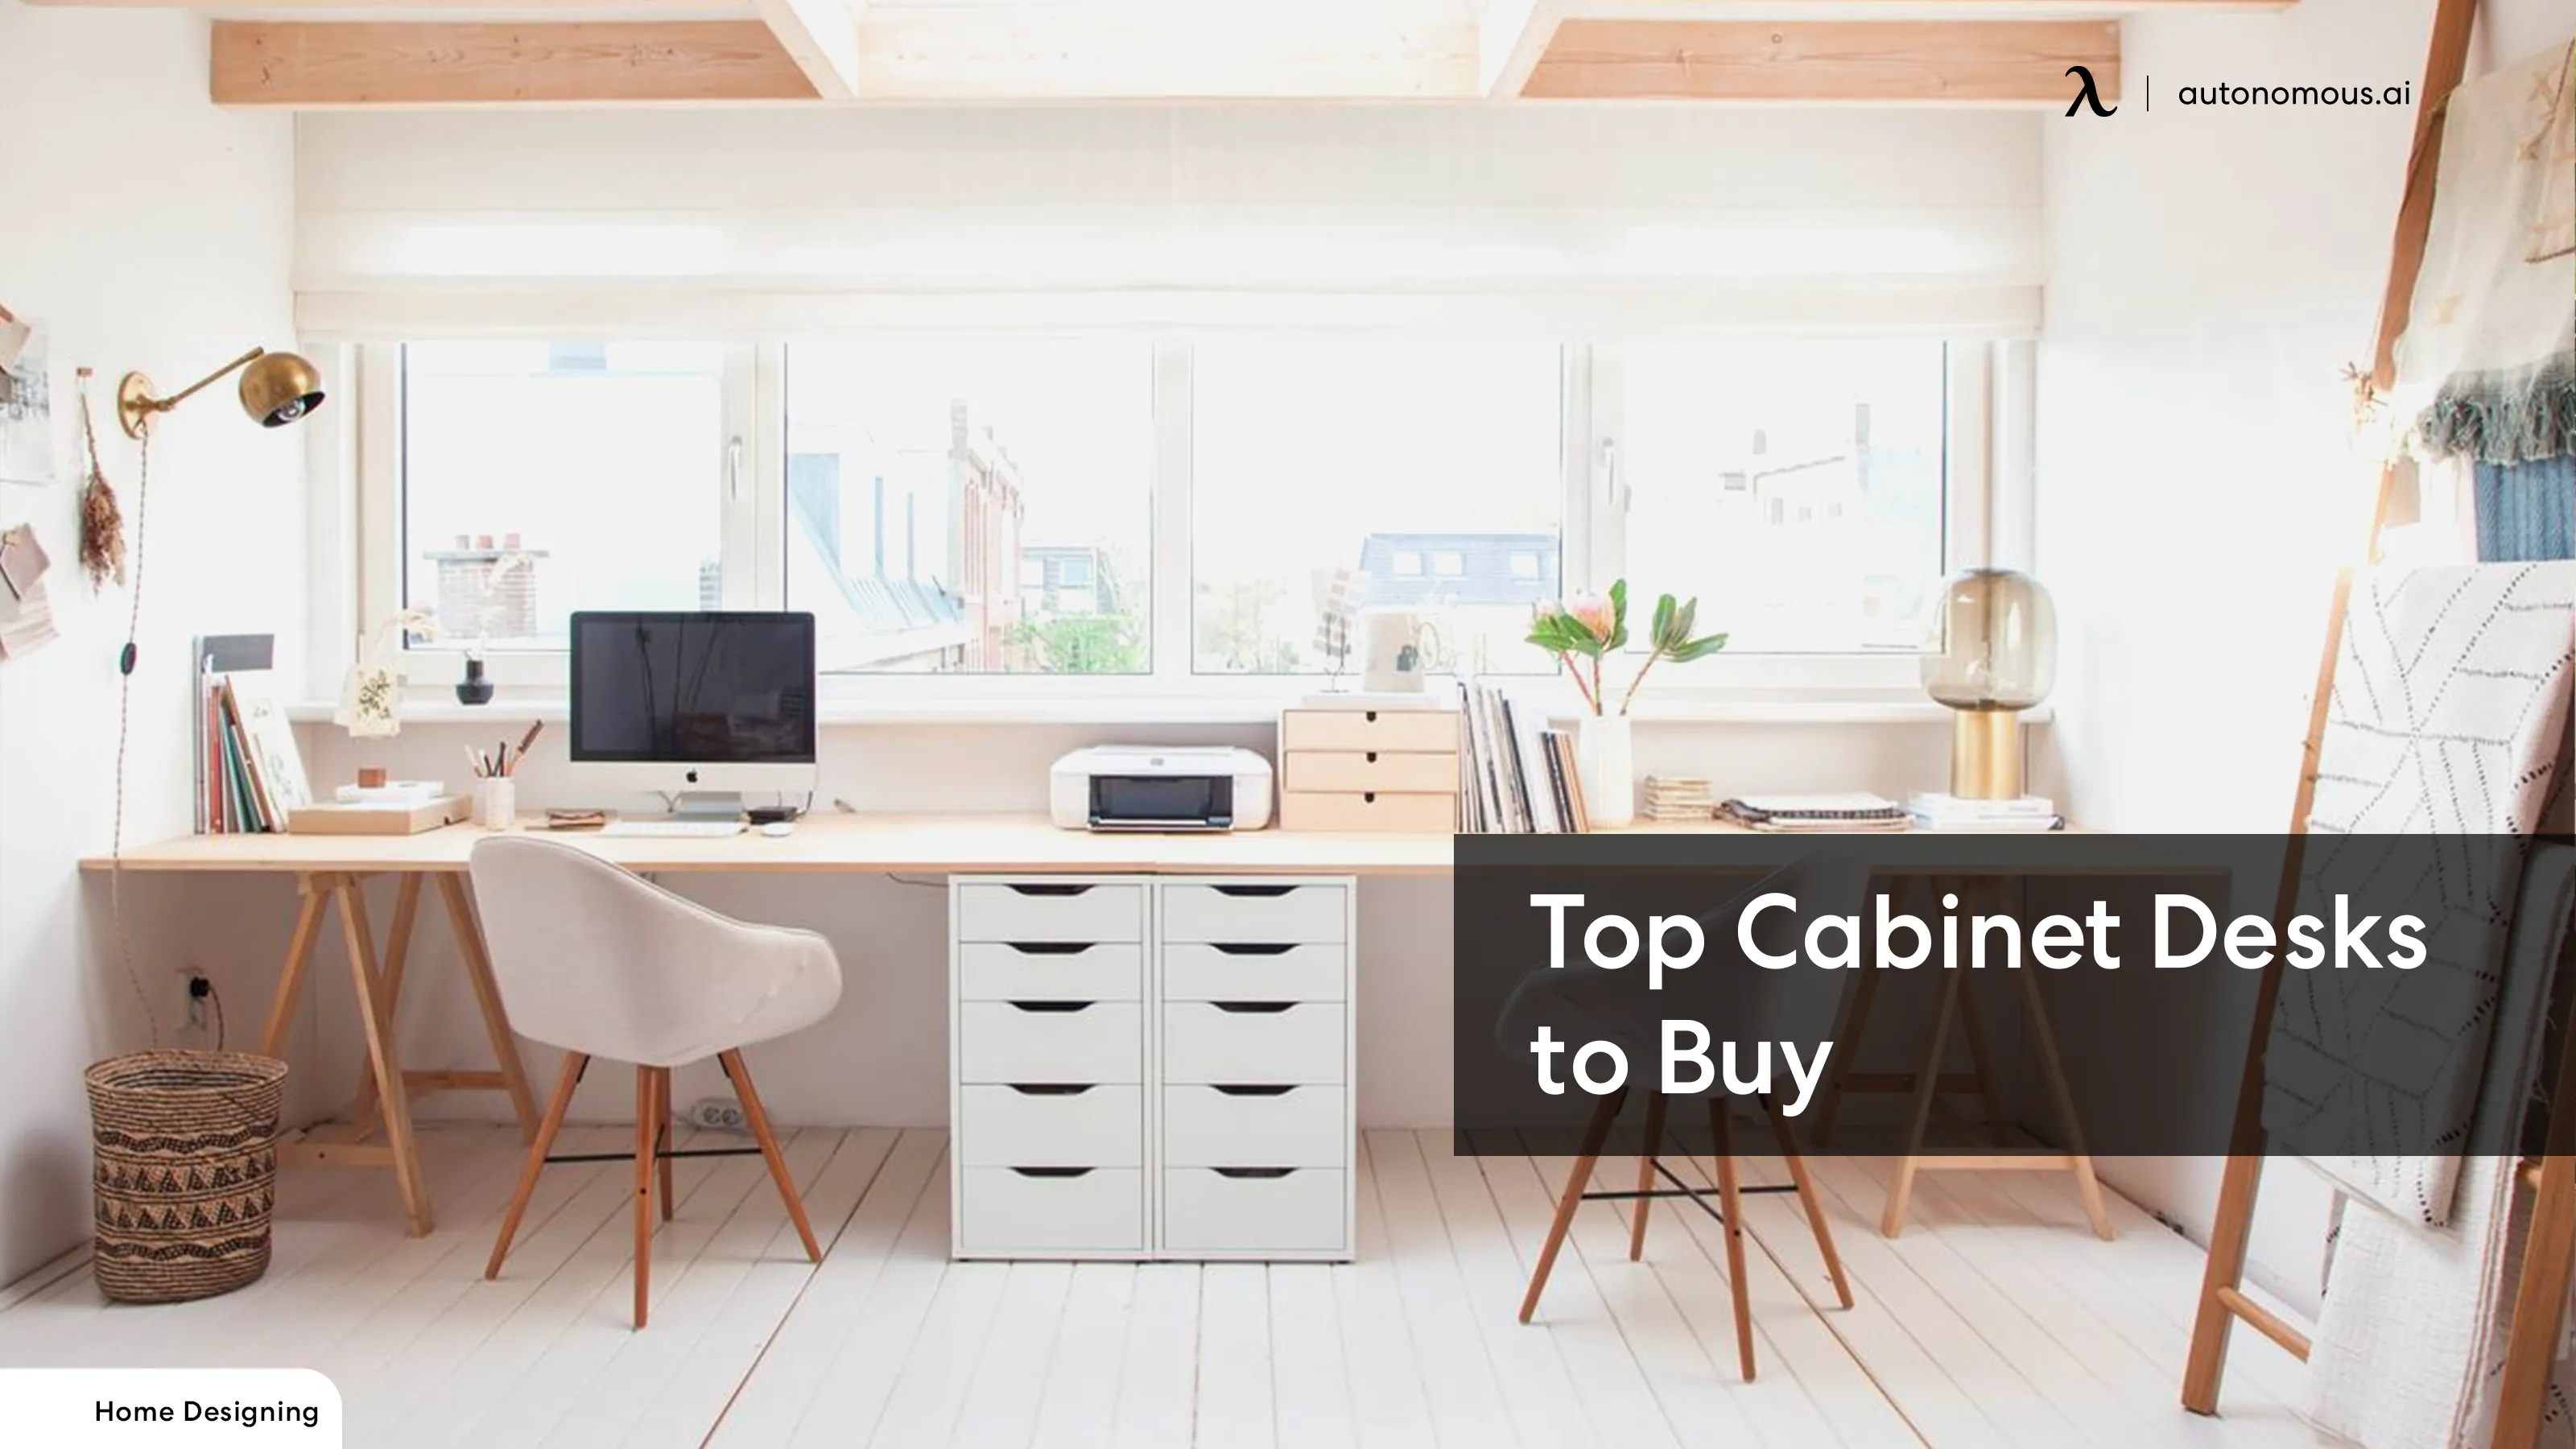 Top 10 Cabinet Desks That Provide Work and Storage in All-in-one